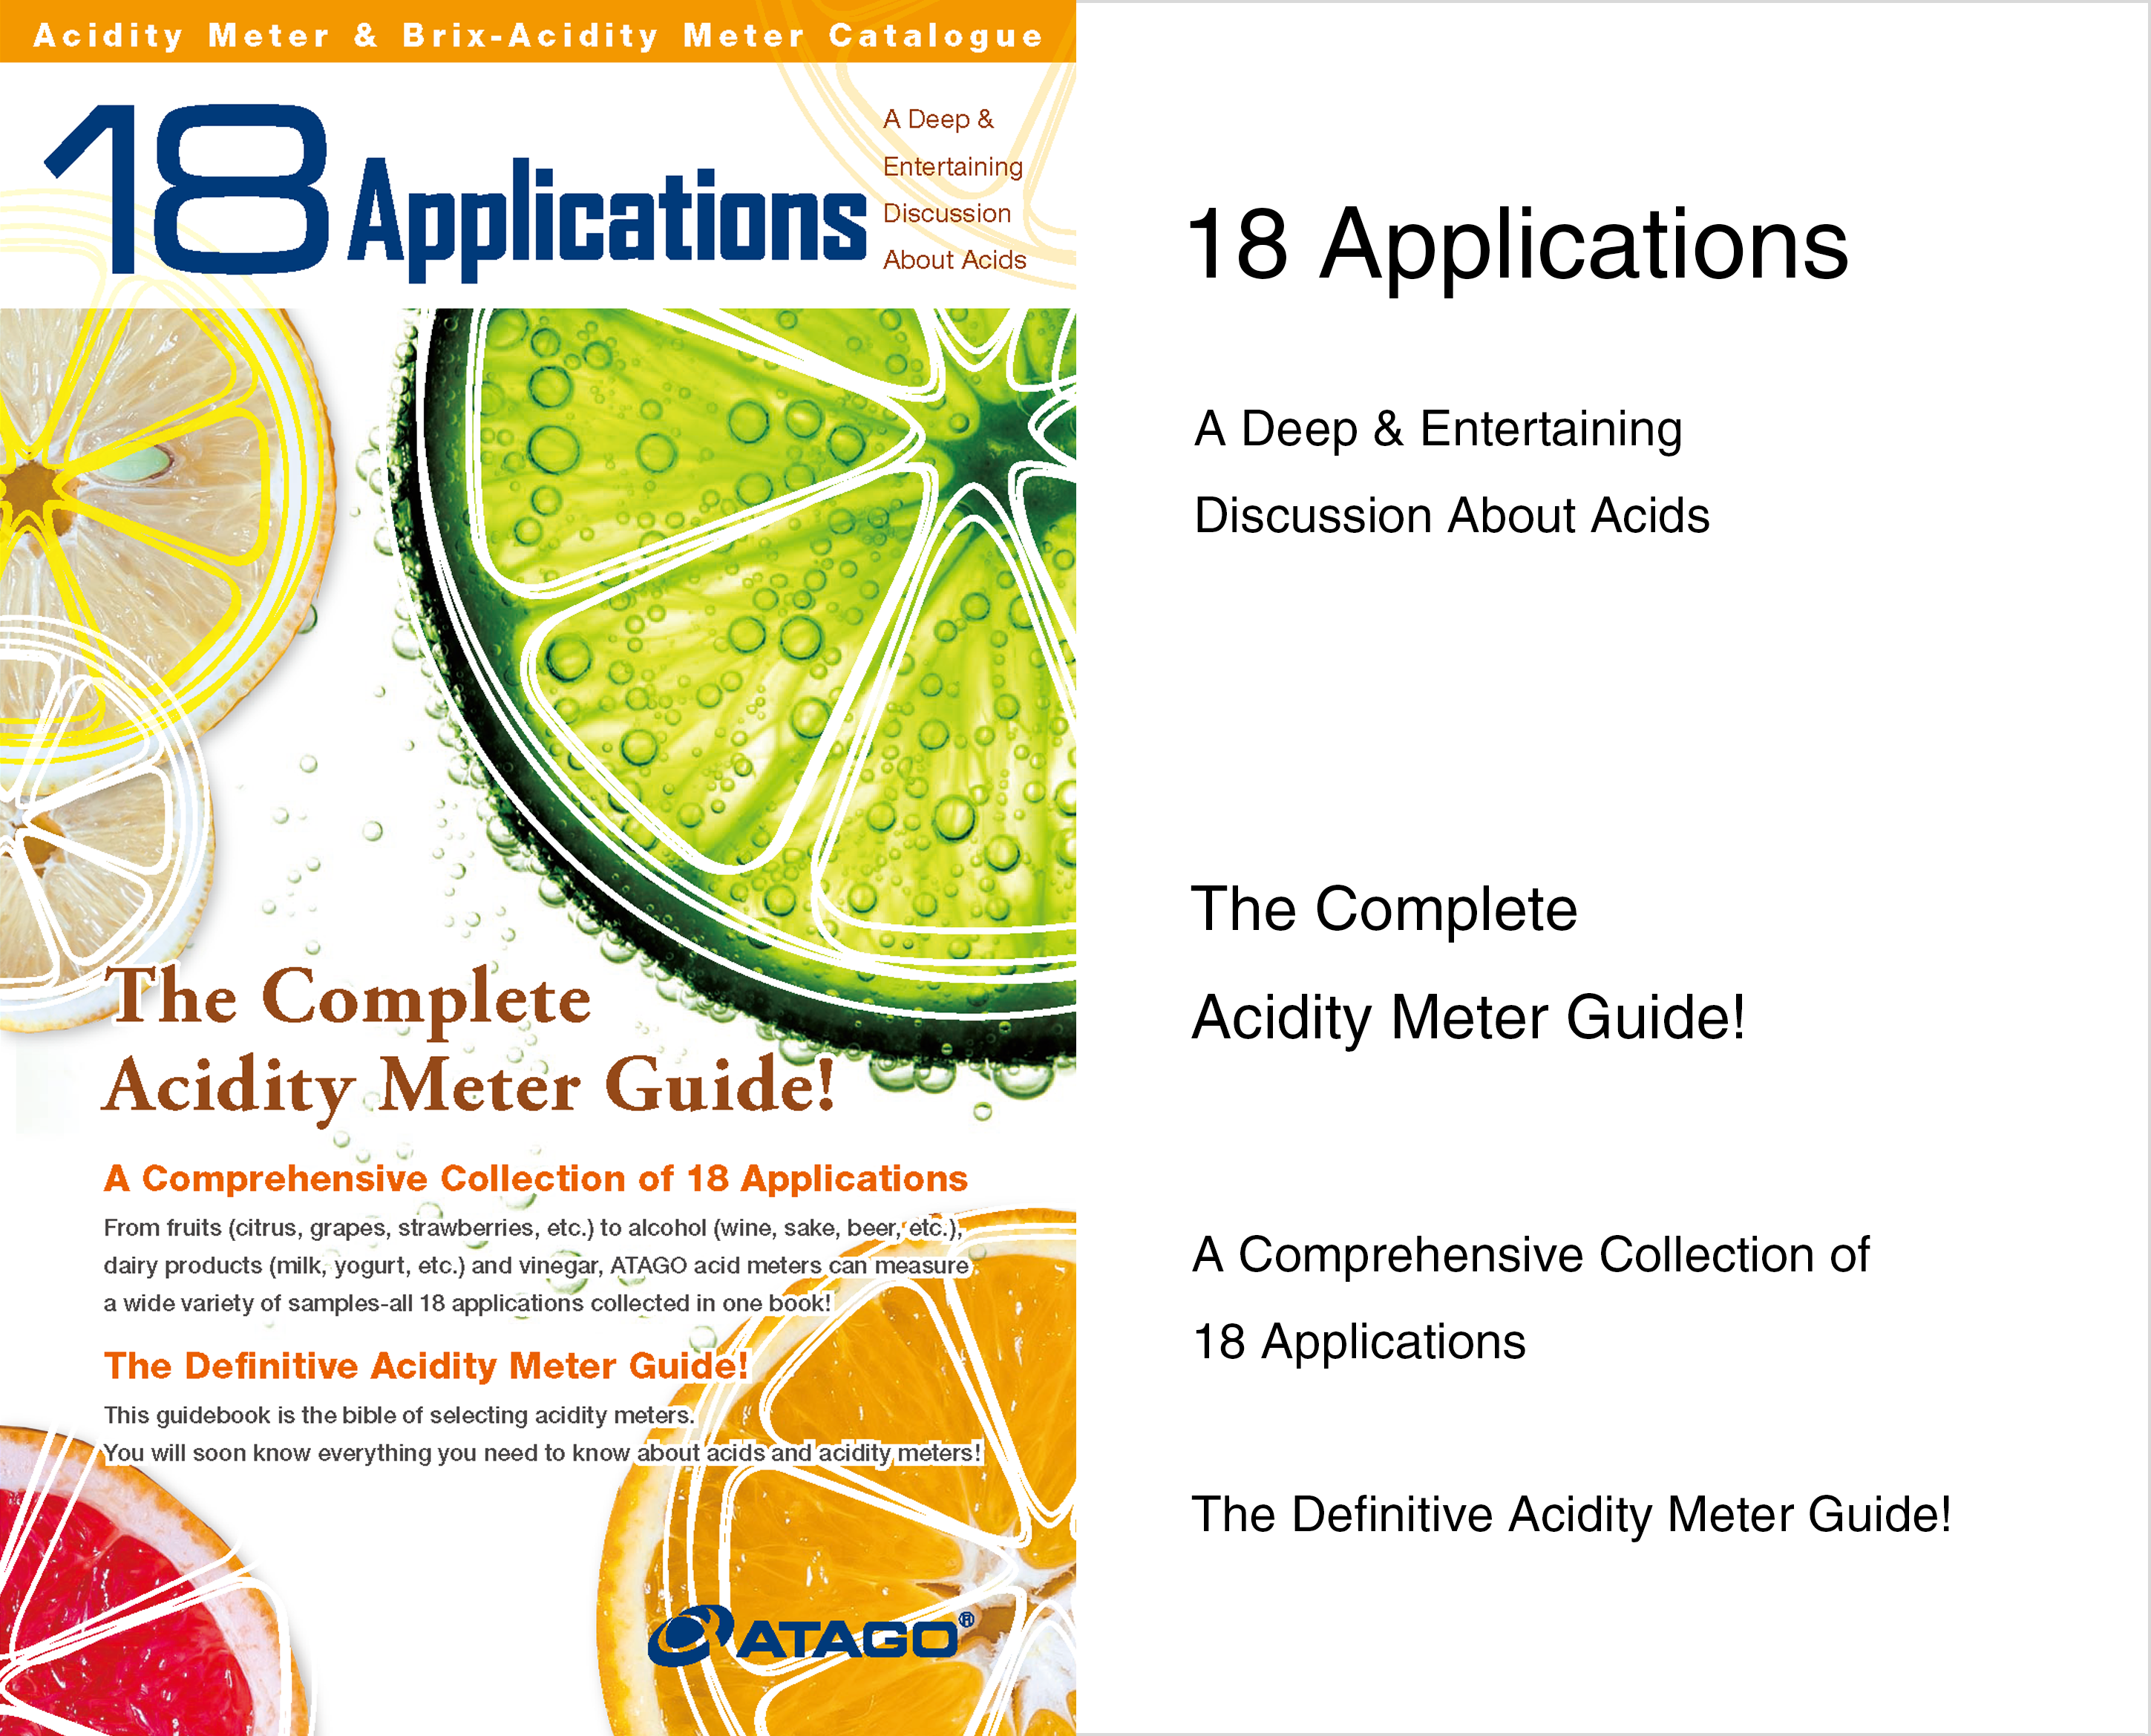 18 Applications / The Complete Acidity Meter Guide!